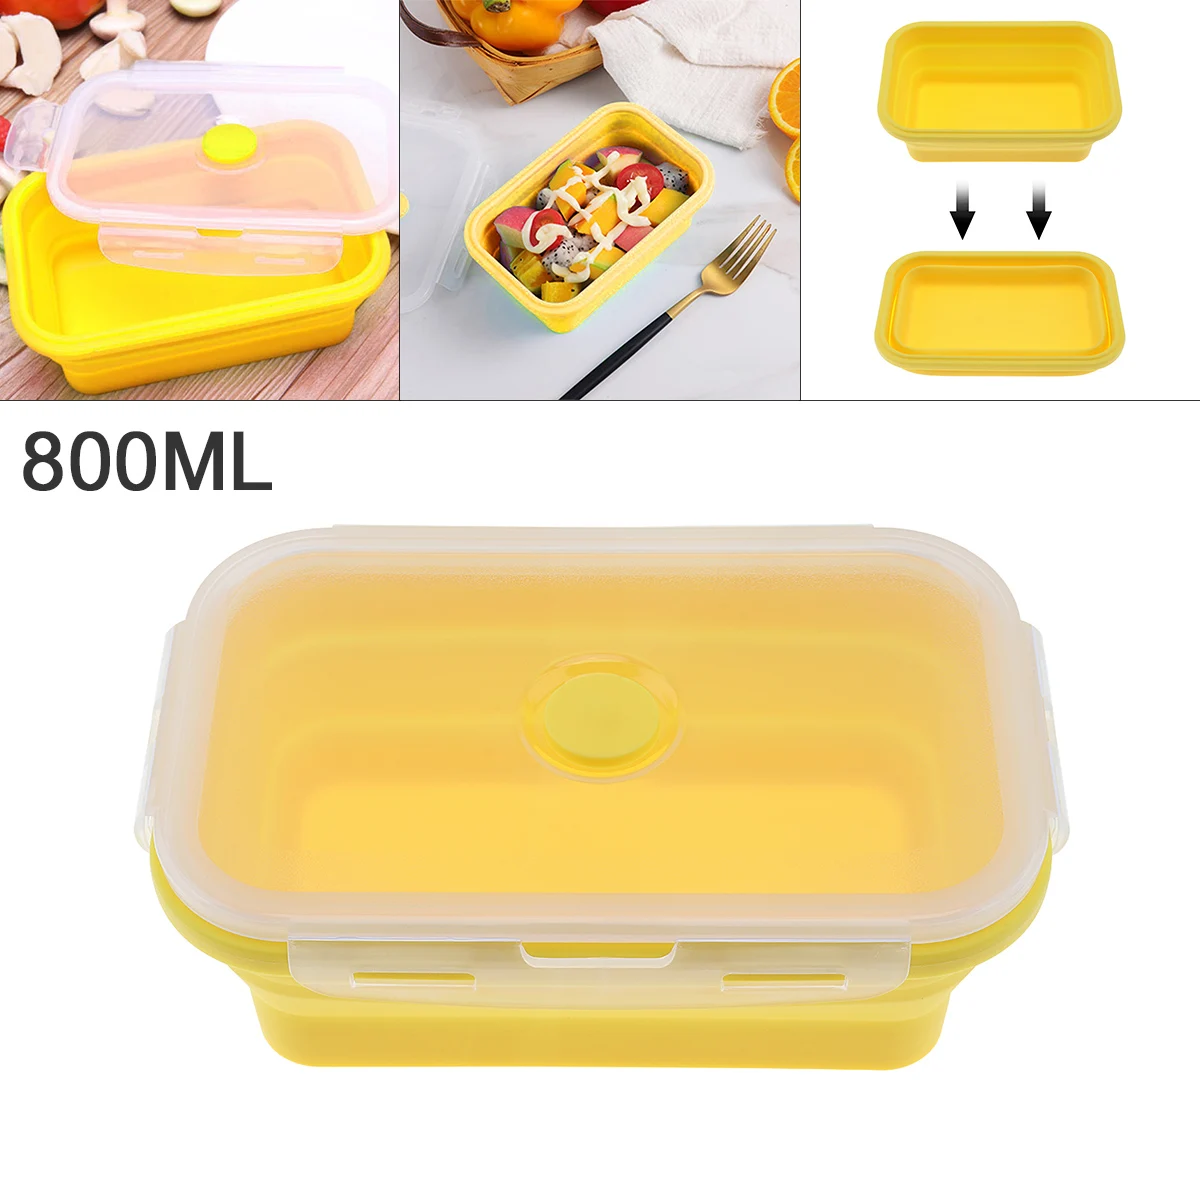 

Yellow 800ML 7 Inch Rectangle Silicone Scalable Folding Lunchbox Bento Box with Silicone Sealing Plug for - 40 ~ 230 Centigrade